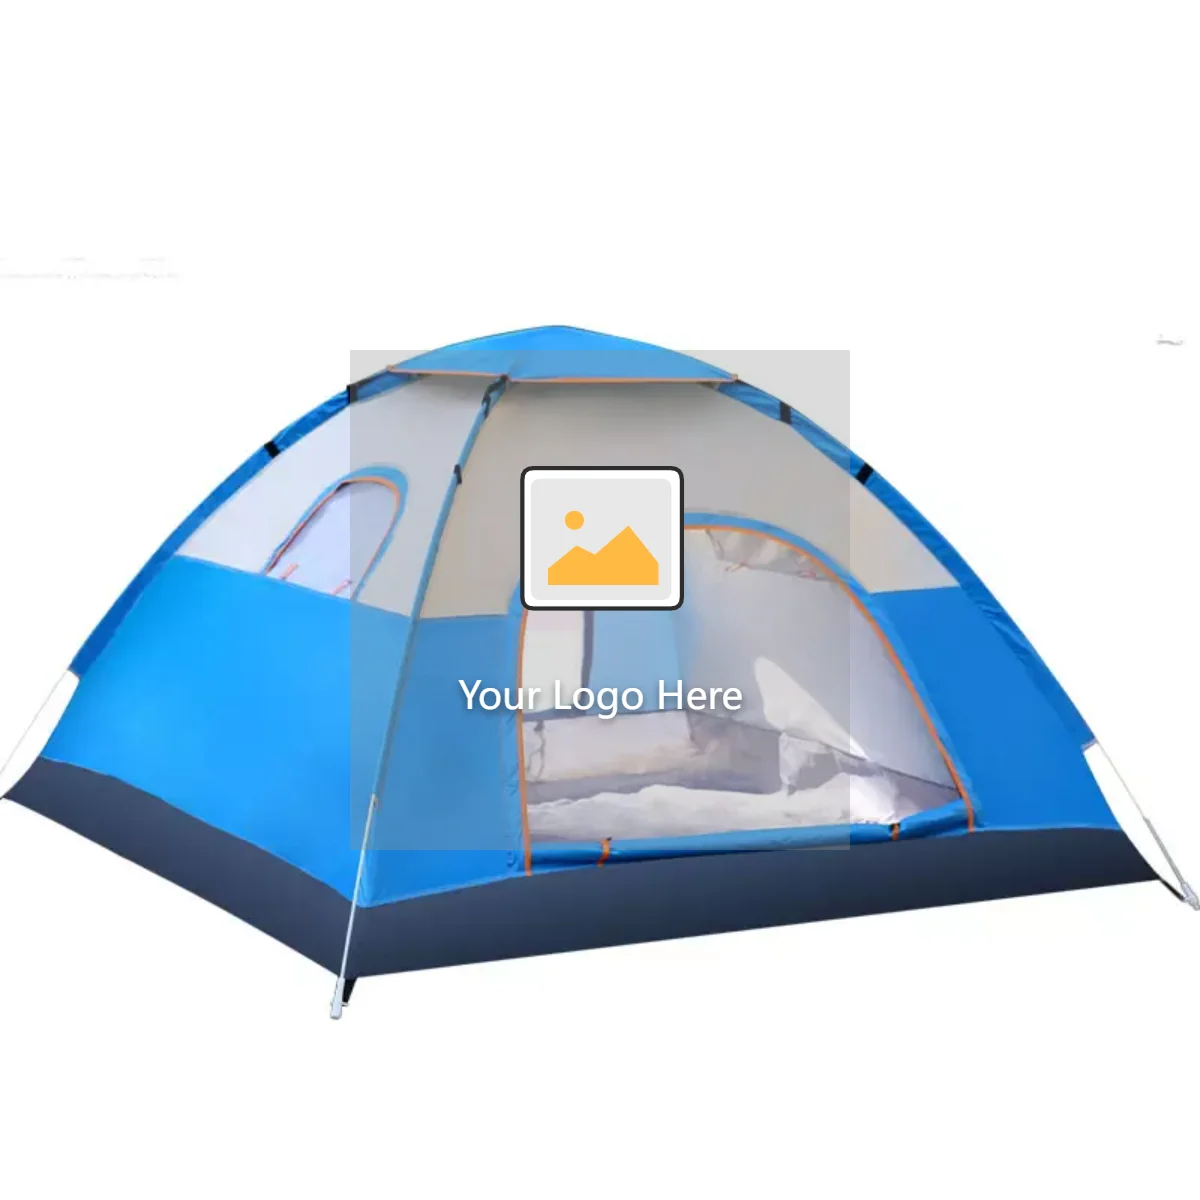 Factory Outlet New Pattern Custom Oem Family Windproof One Touch Pop Up Travel Tent Camping Outdoor Tent - Buy Camping Tents,Travel Tent,Outdoor Tent Product on